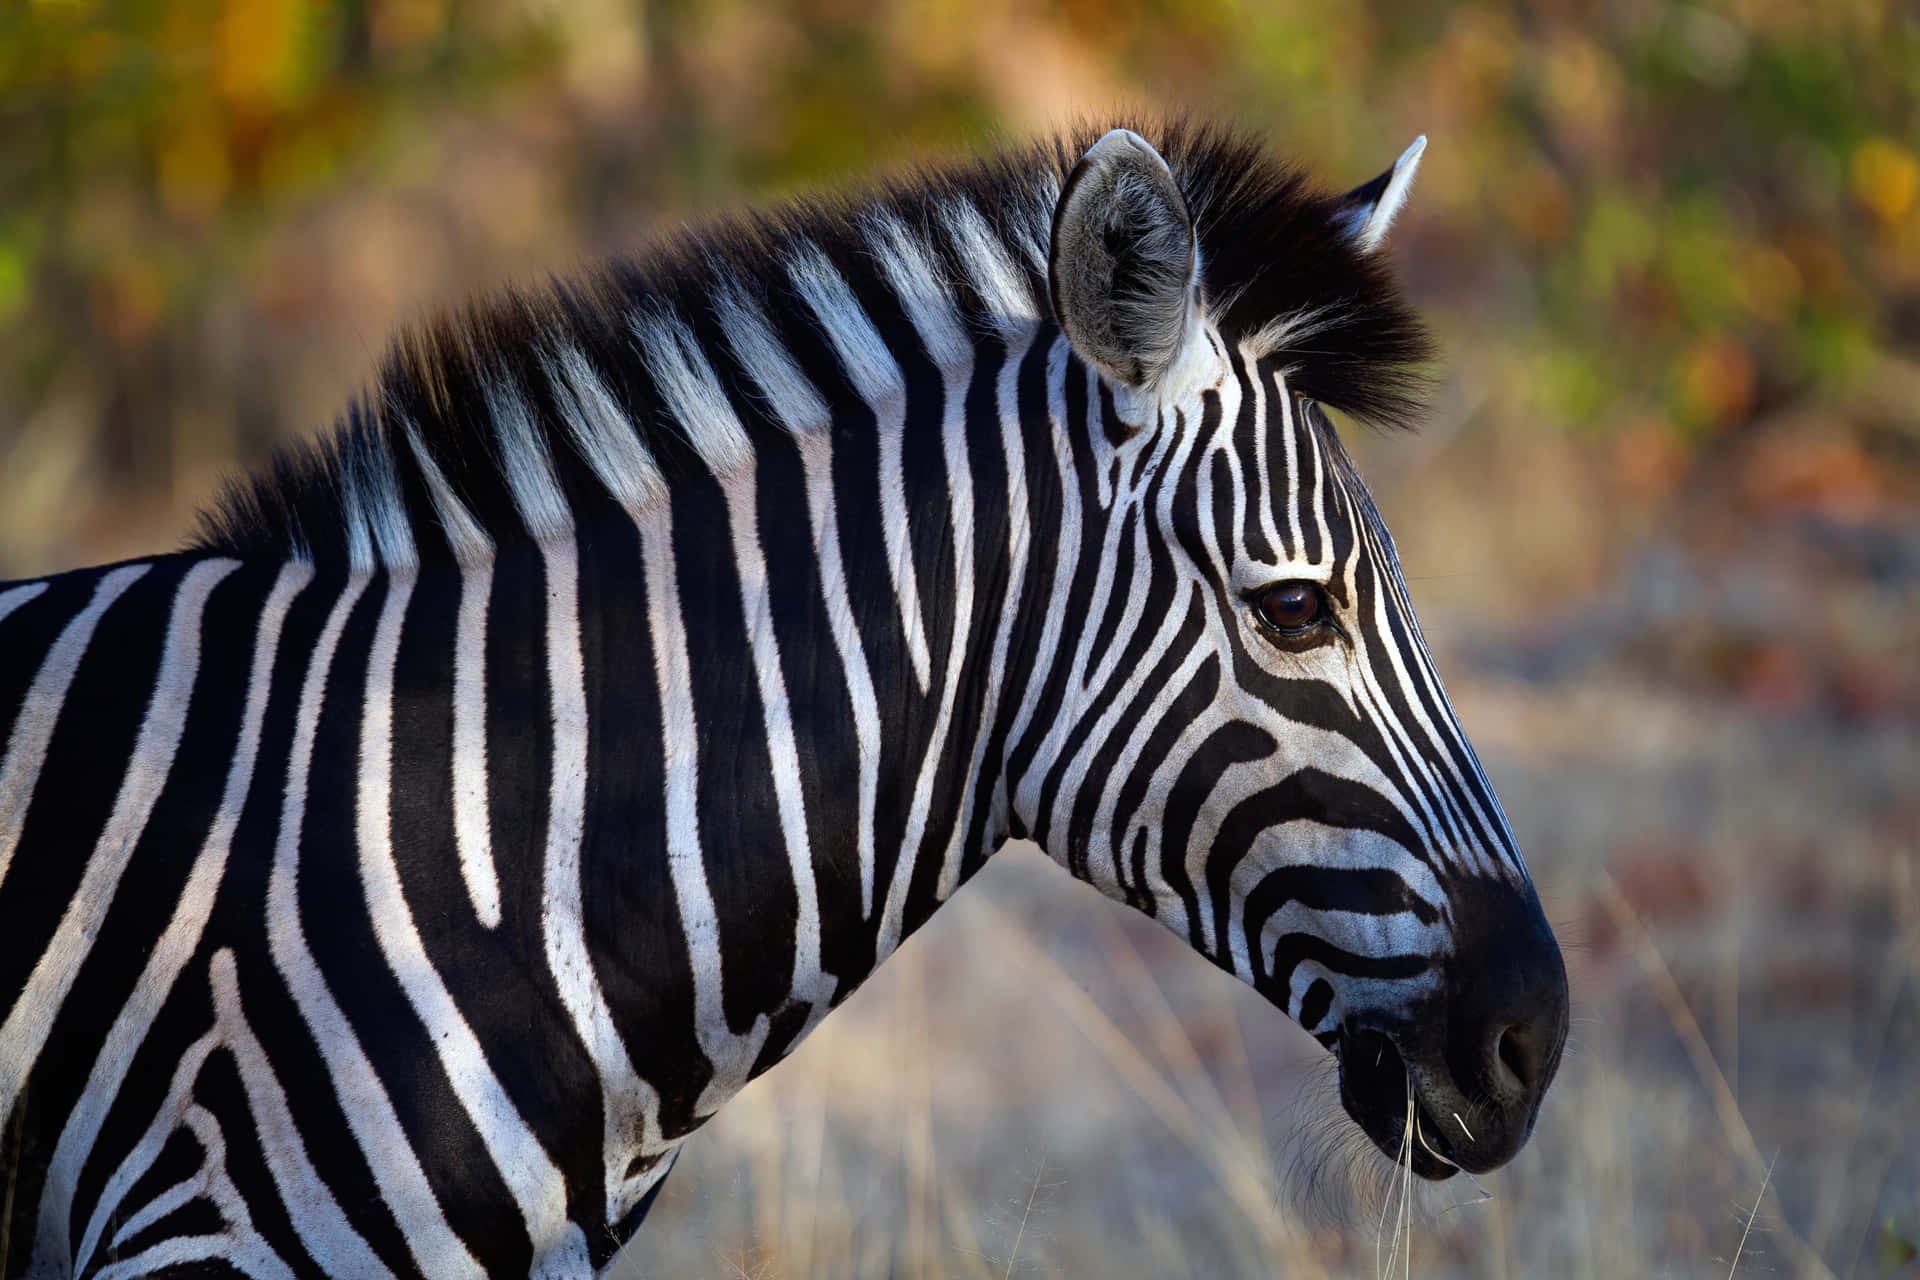 A beautiful and vibrant Zebra, black and white yet very lively